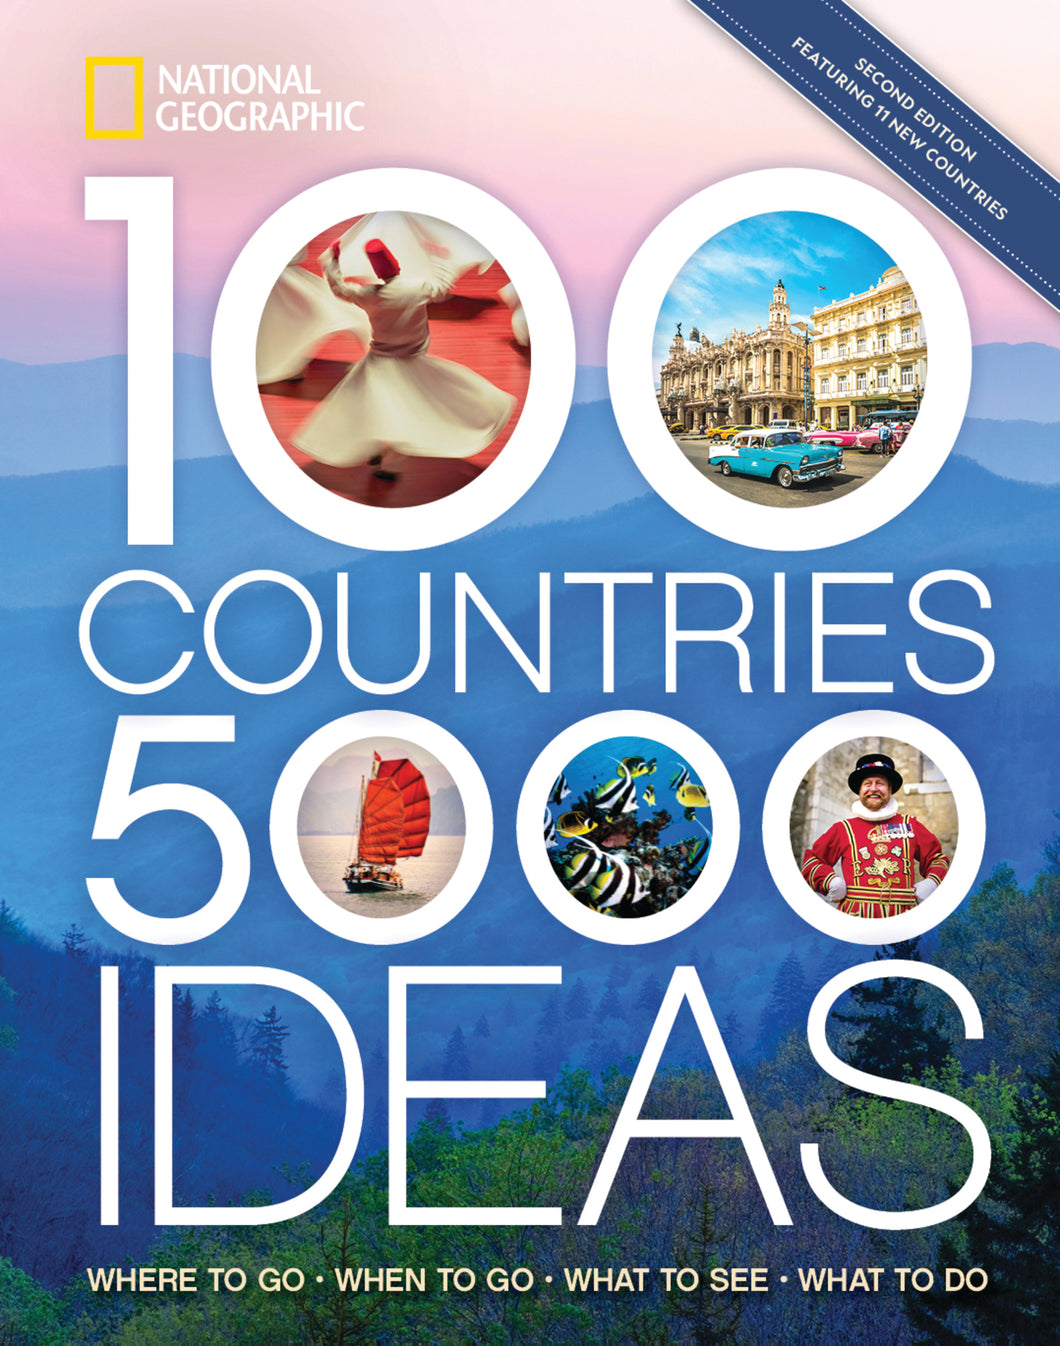 National Geographic 100 COUNTRIES, 5,000 IDEAS (2nd EDITION)